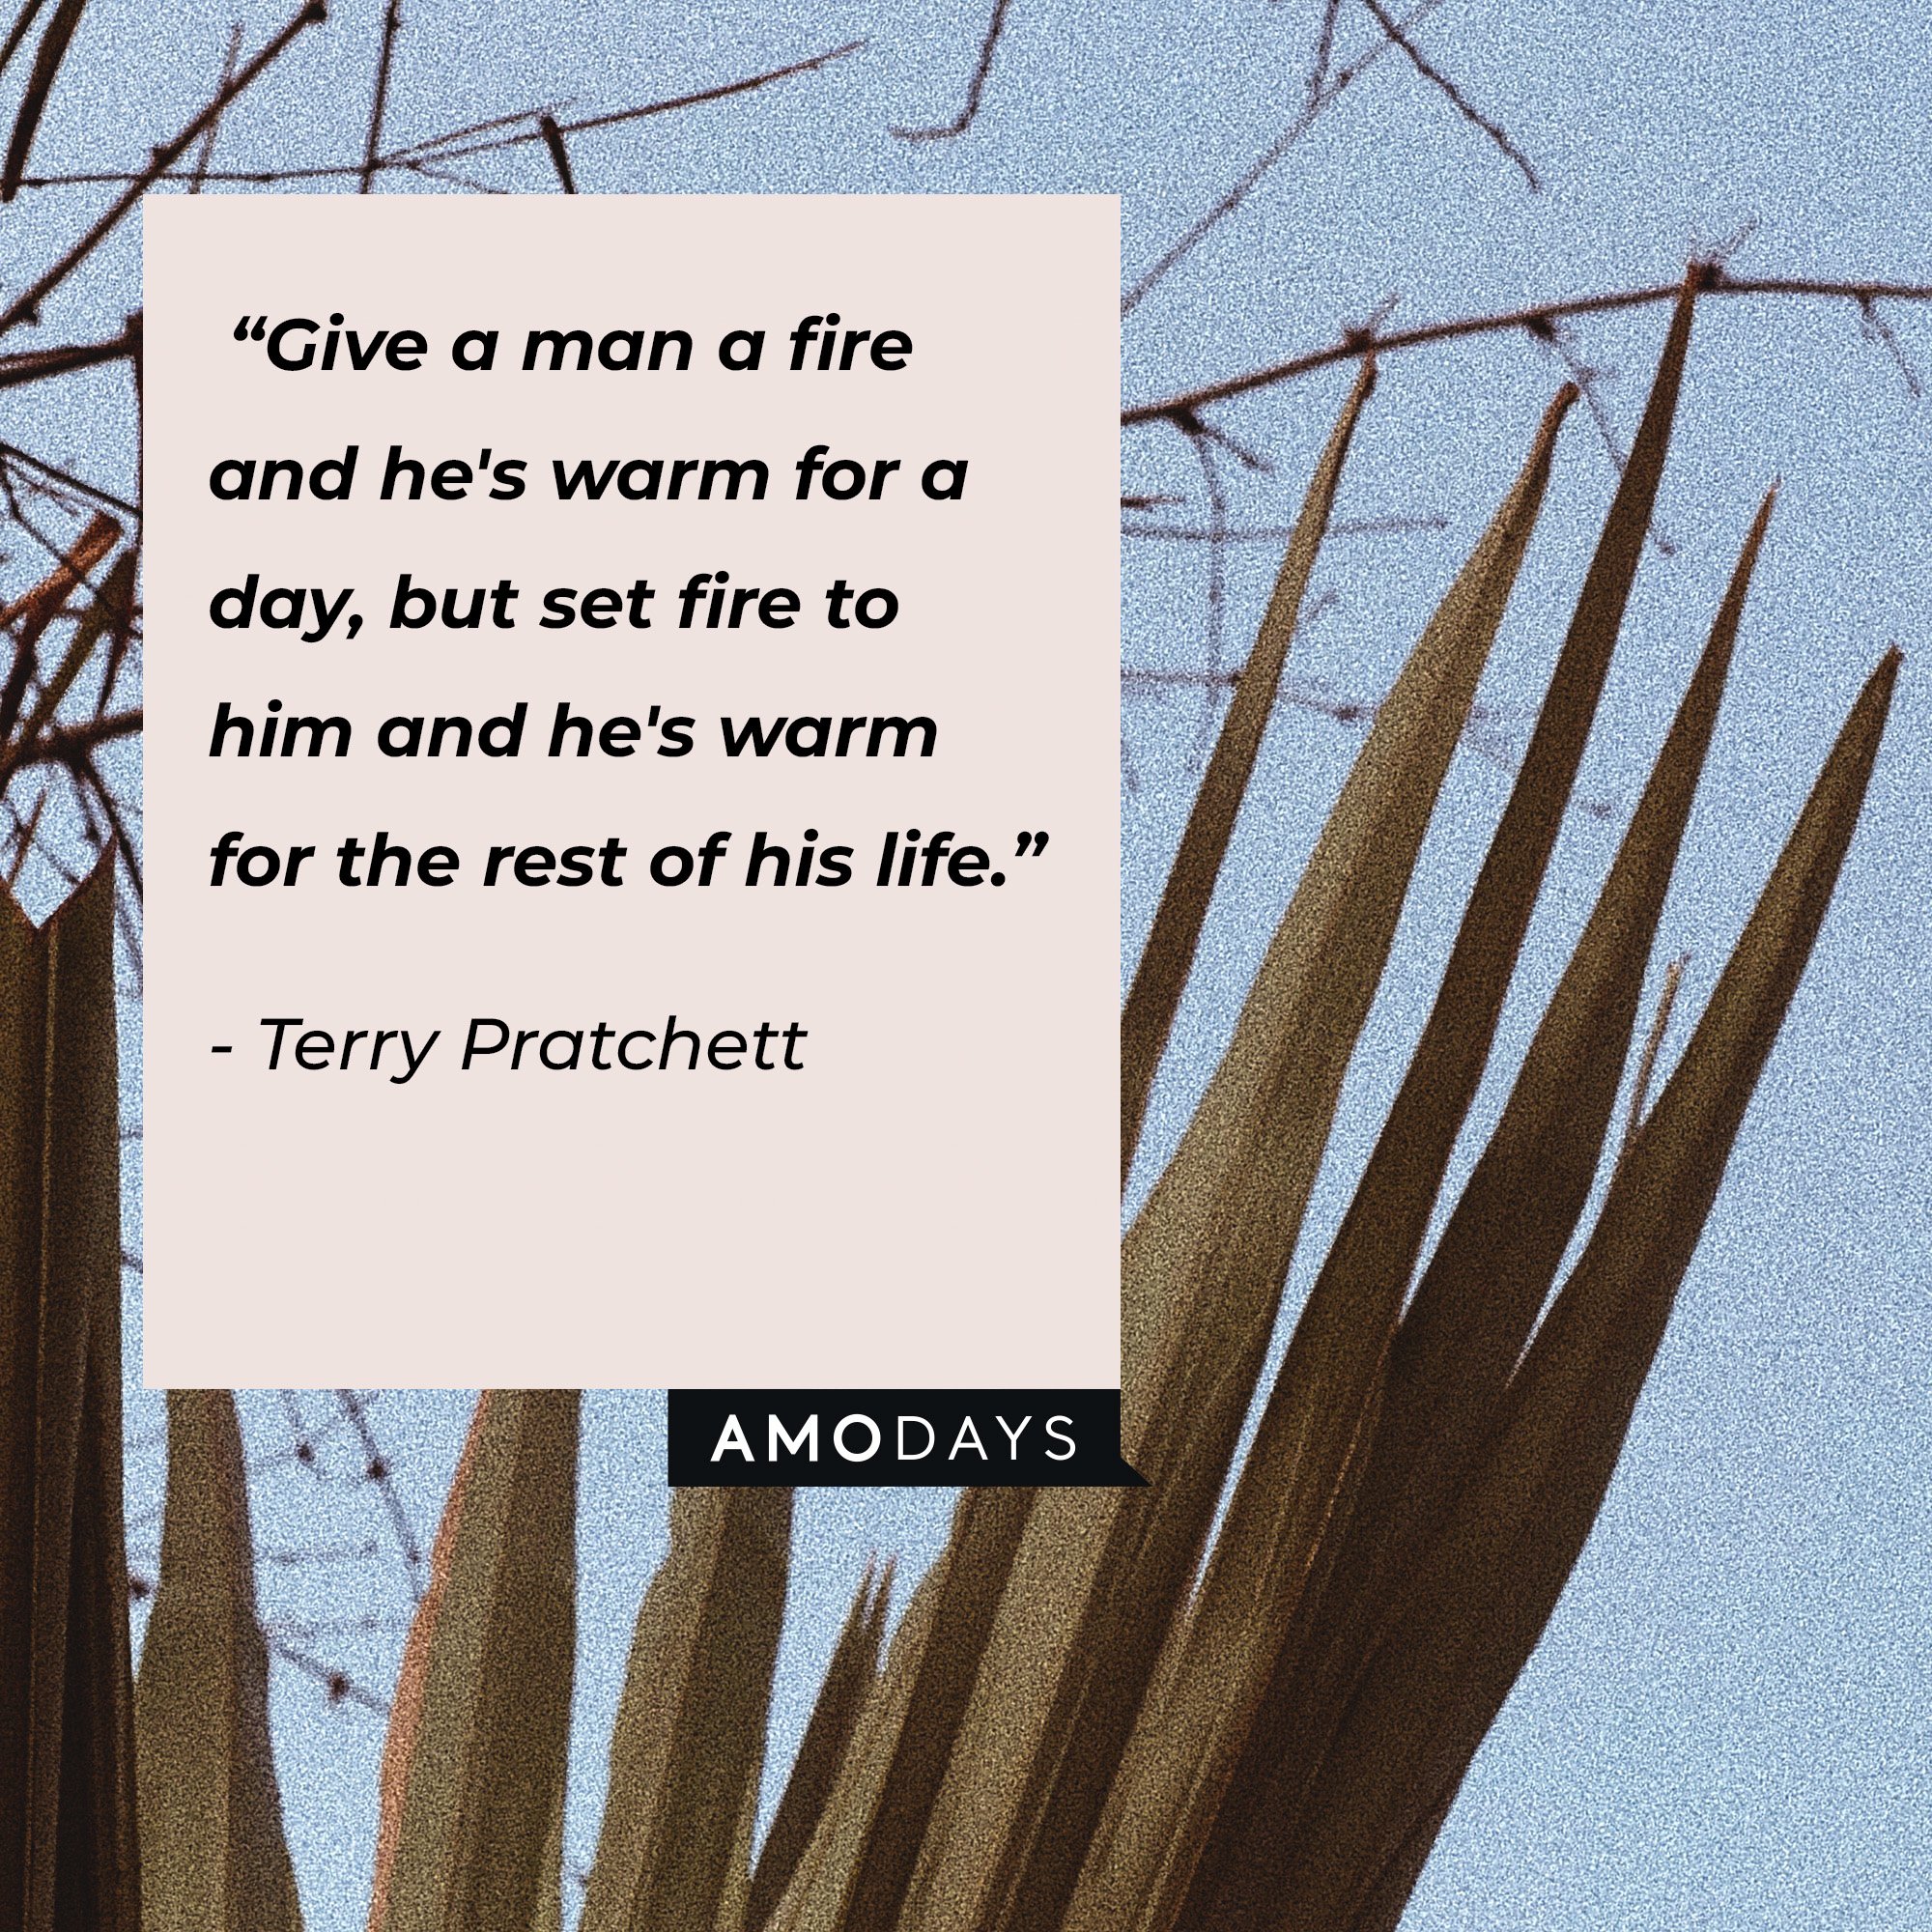  Terry Pratchett's quote: “Give a man a fire and he's warm for a day, but set fire to him and he's warm for the rest of his life.” | Image: AmoDays